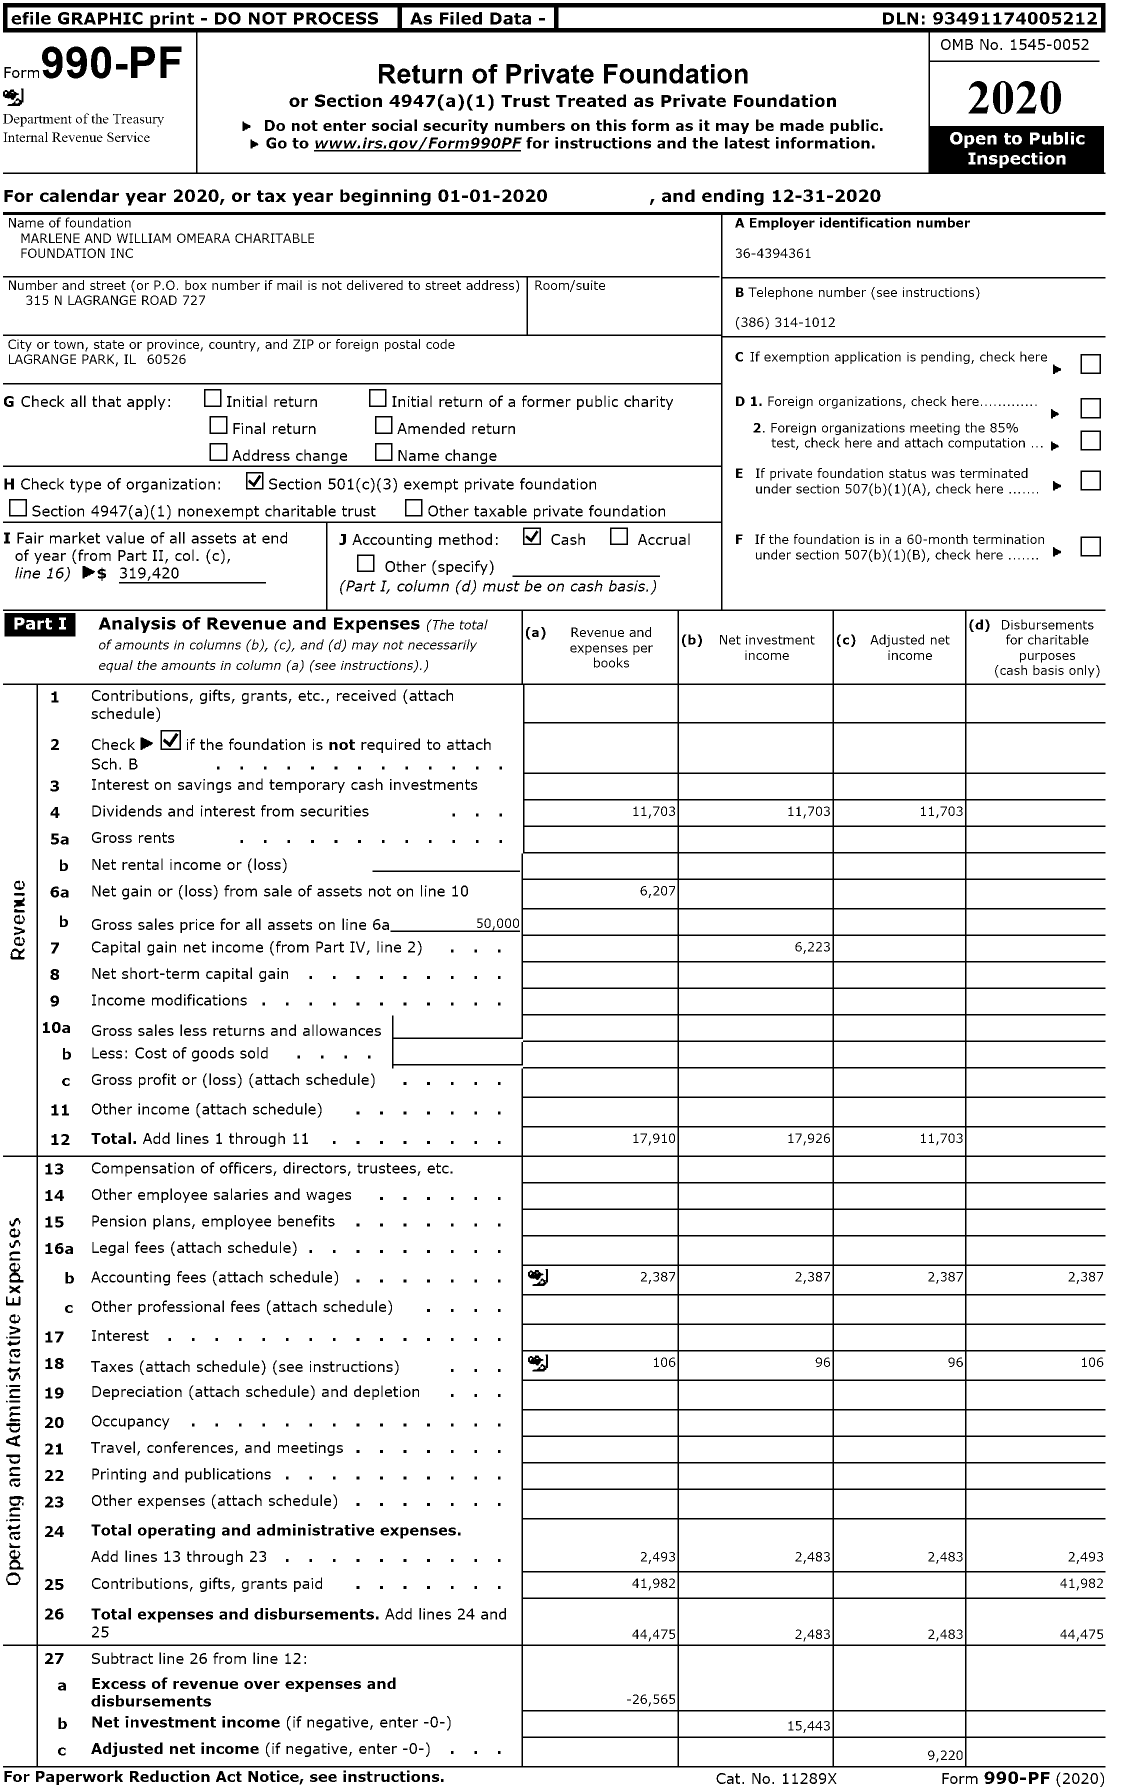 Image of first page of 2020 Form 990PF for Marlene and William Omeara Charitable Foundation